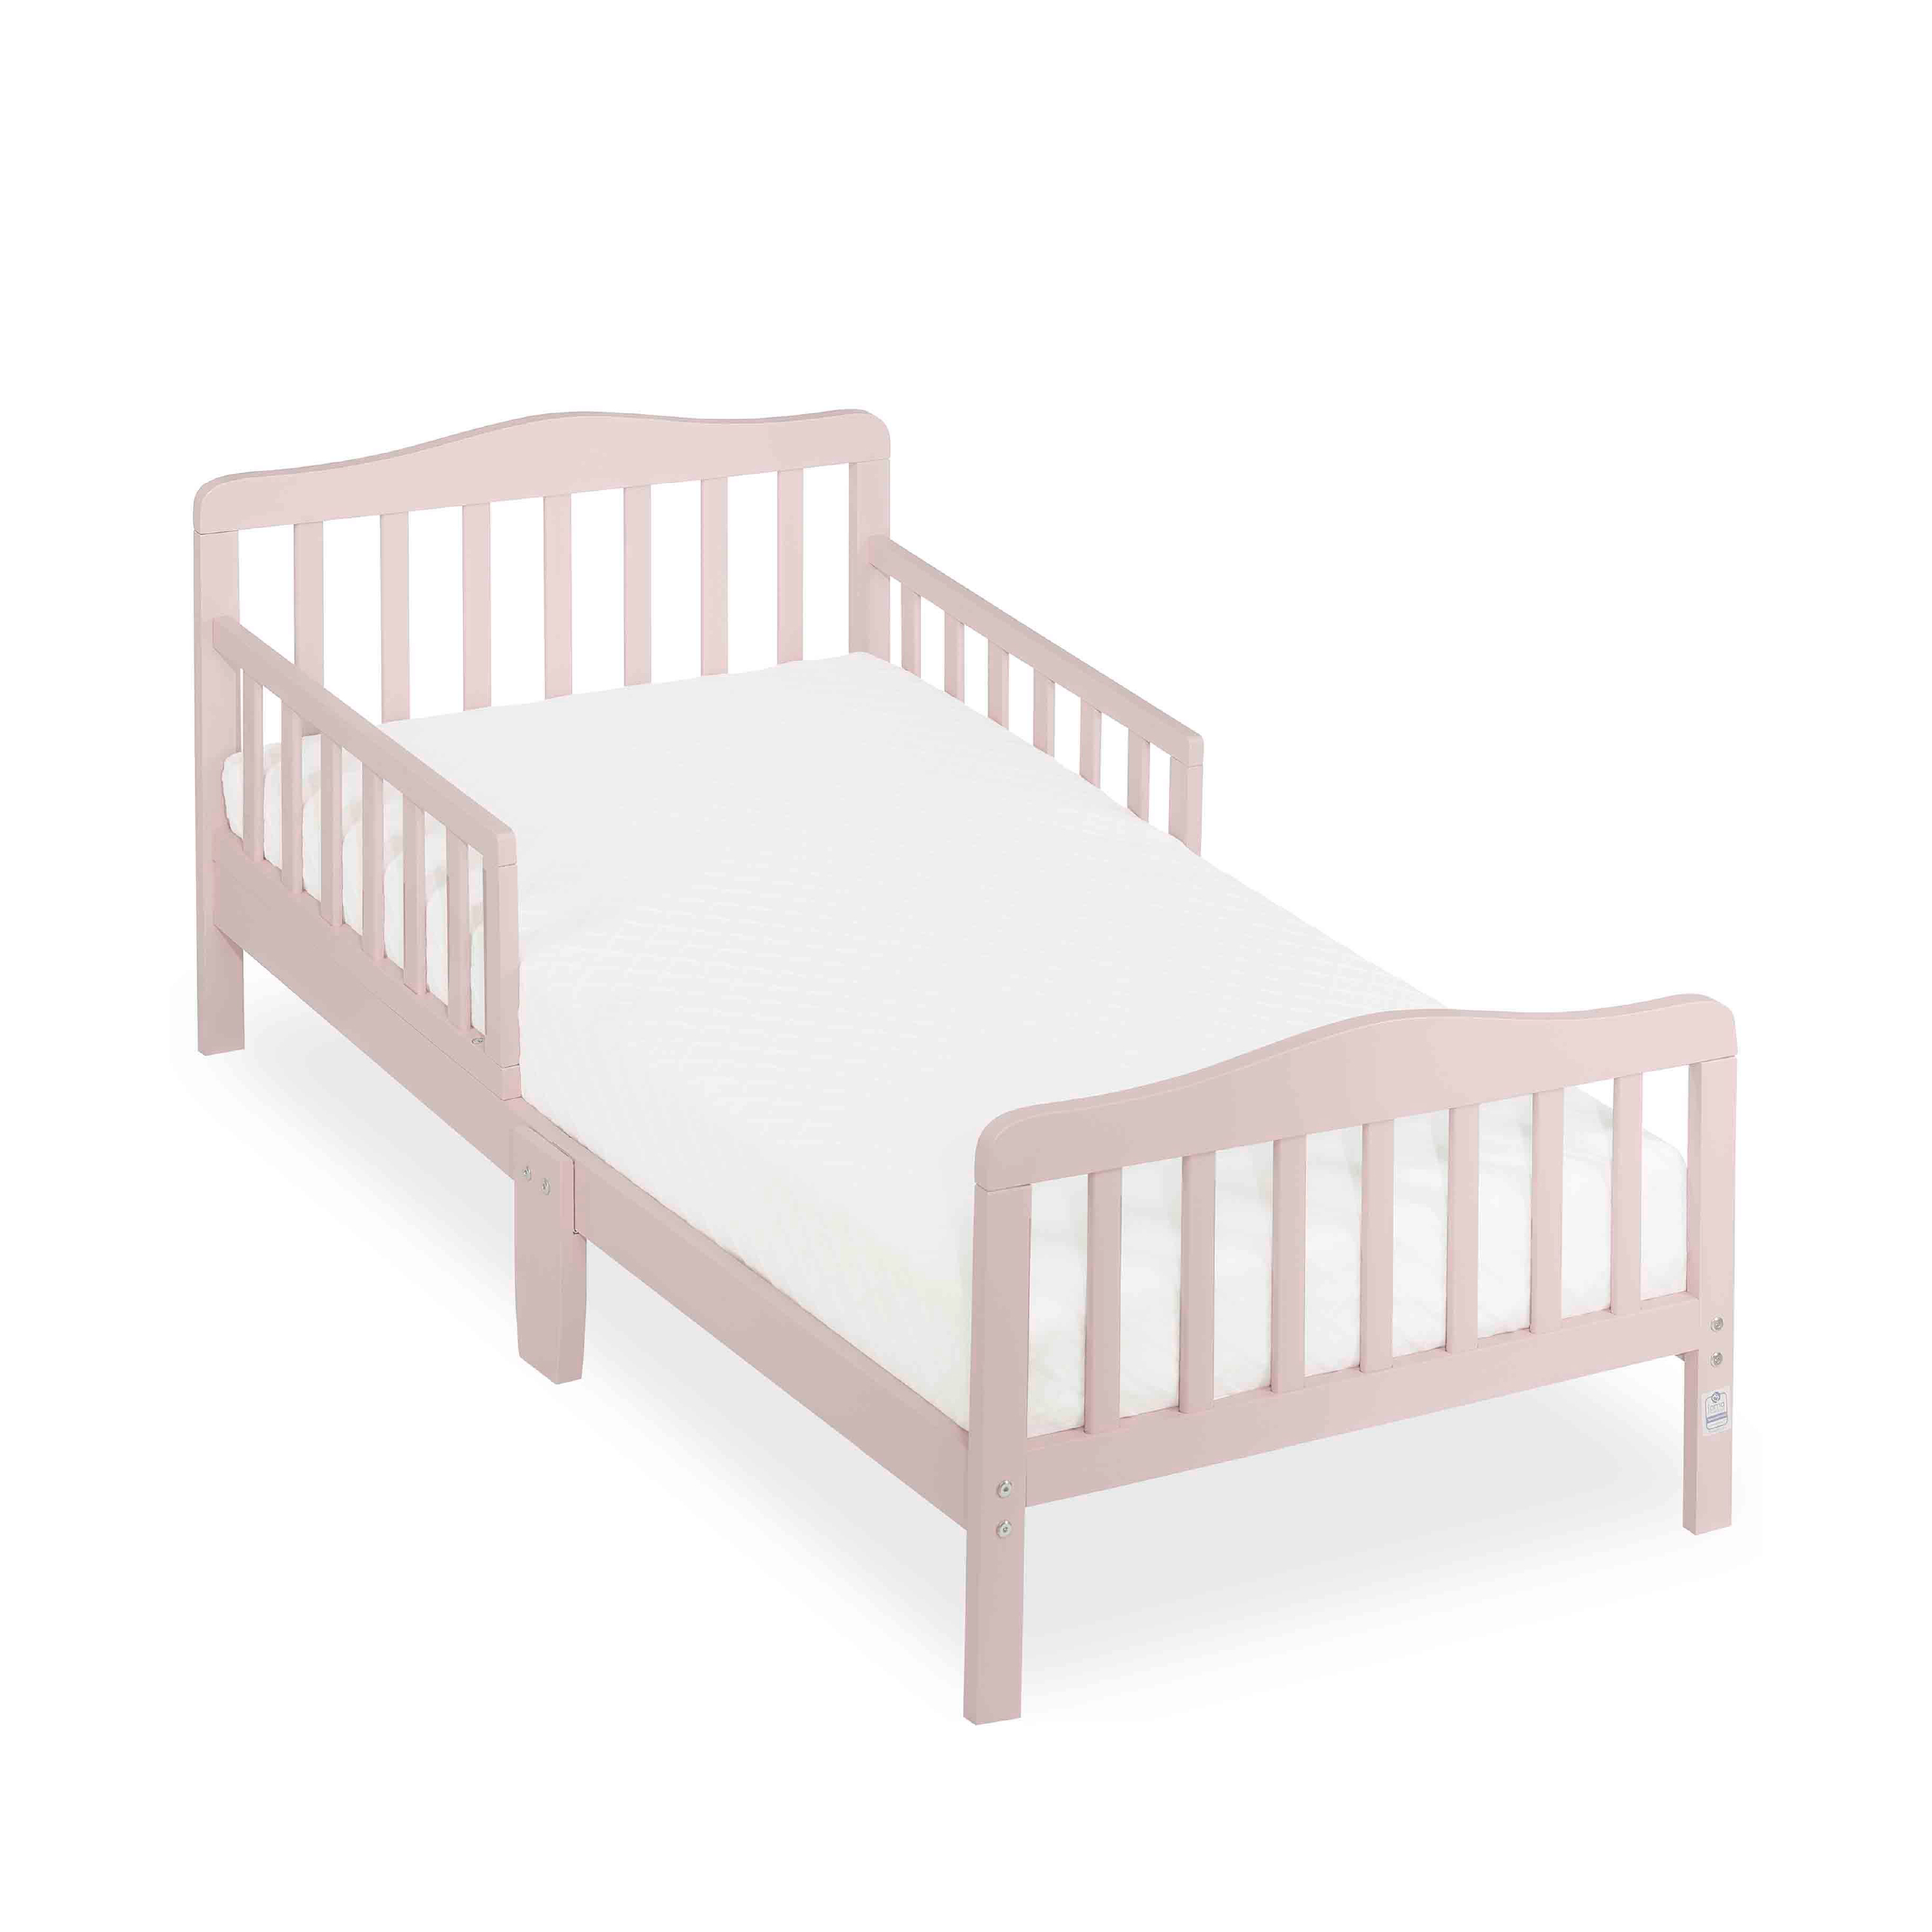 Dream On Me Classic Design Toddler Bed, Pink - image 1 of 11